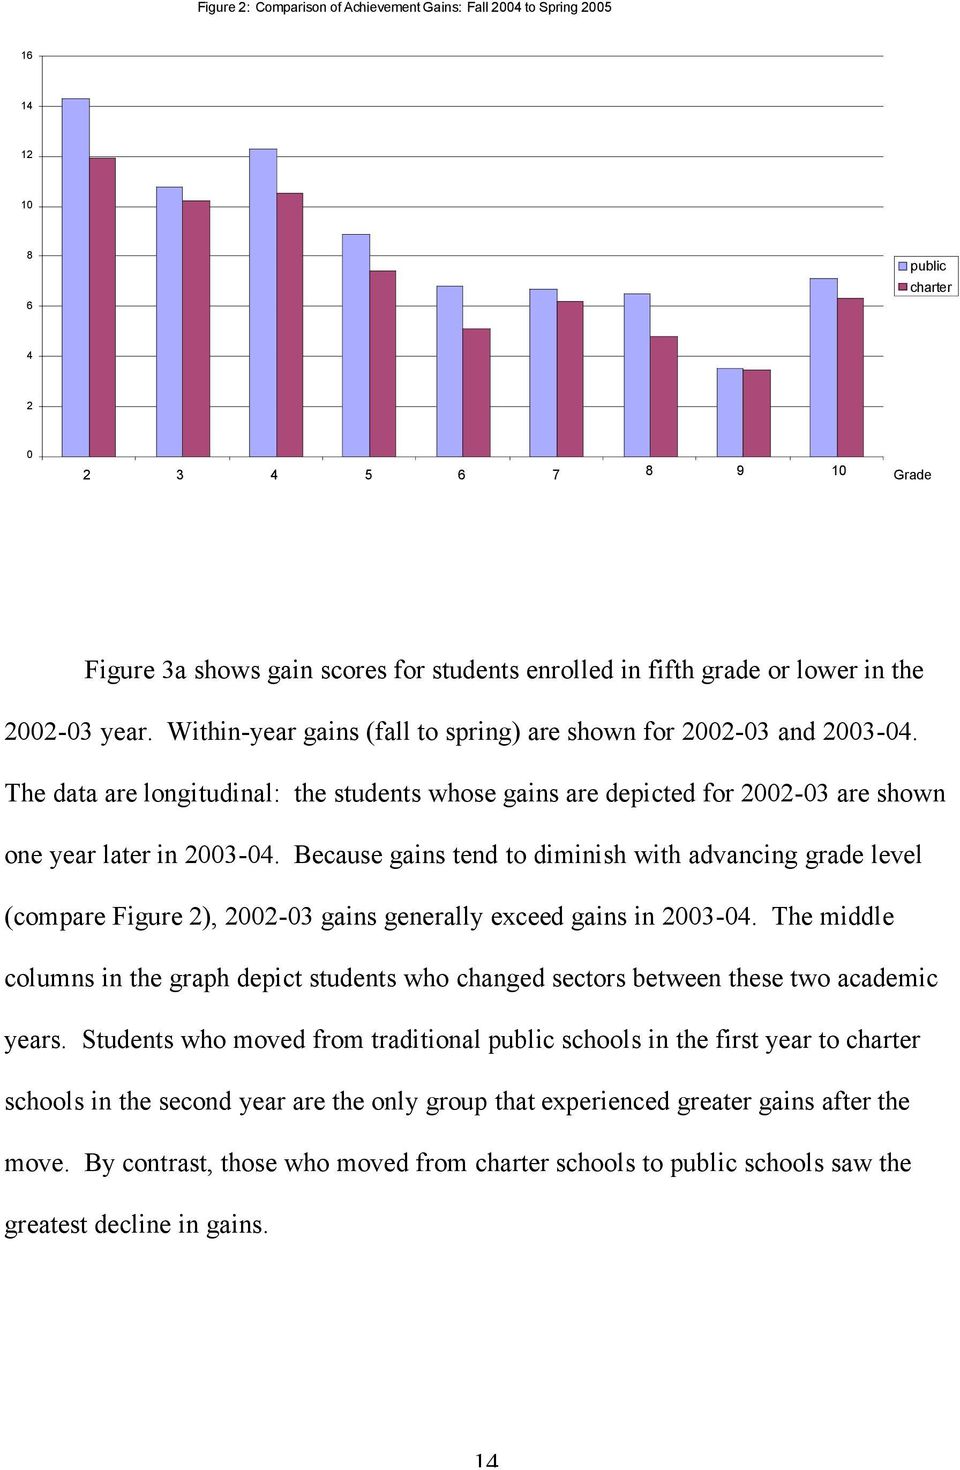 The data are longitudinal: the students whose gains are depicted for 2002-03 are shown one year later in 2003-04.